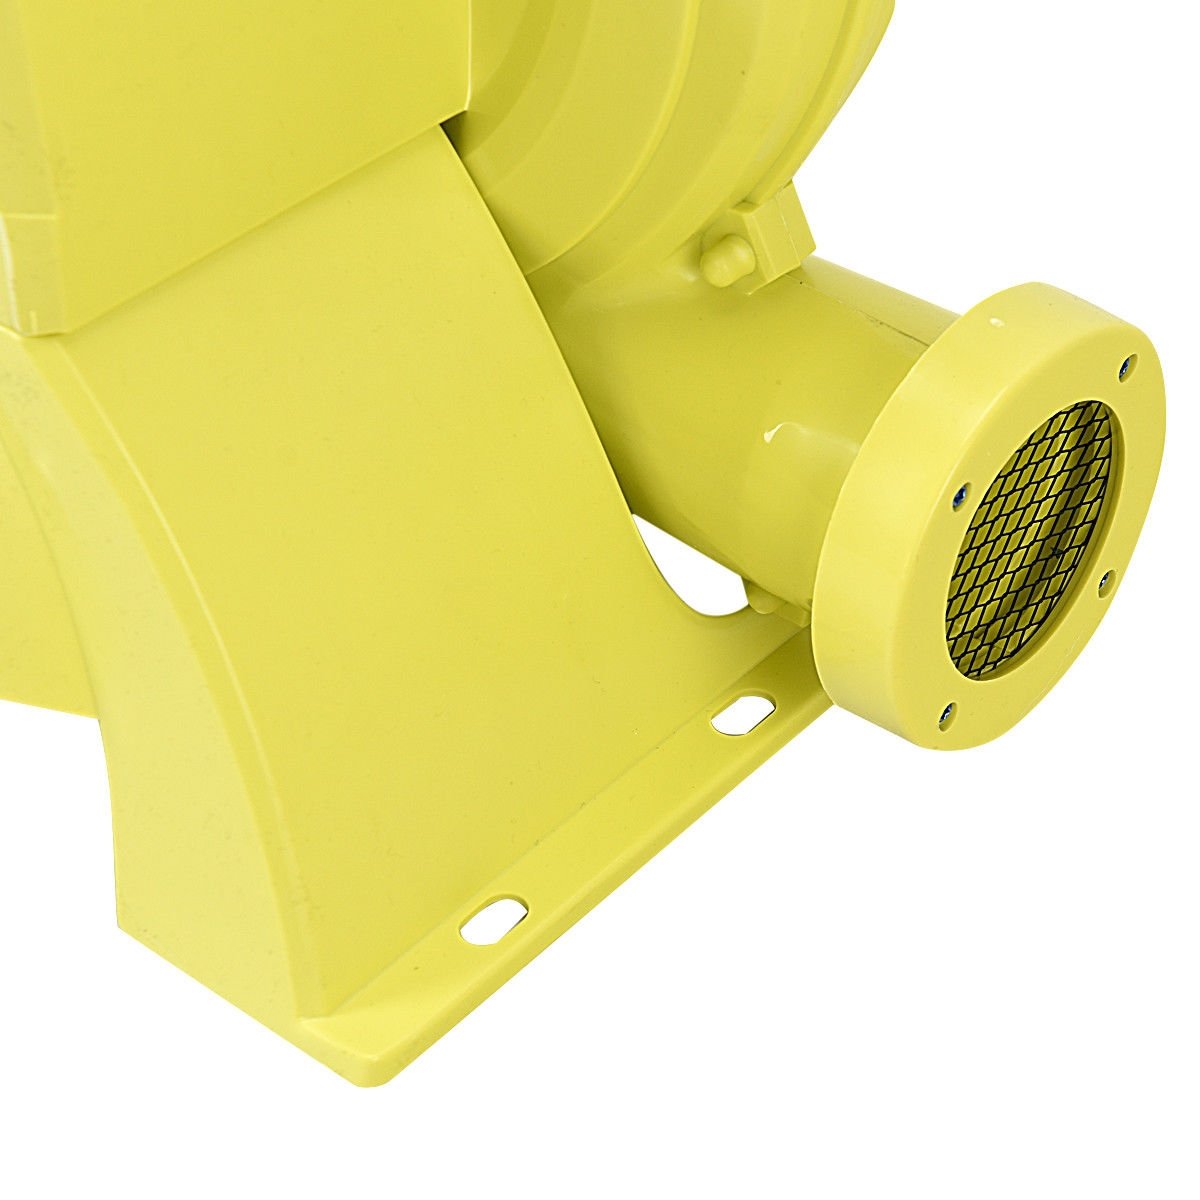 950 W 1.25 HP Air Blower Pump Fan for Inflatable Bounce House